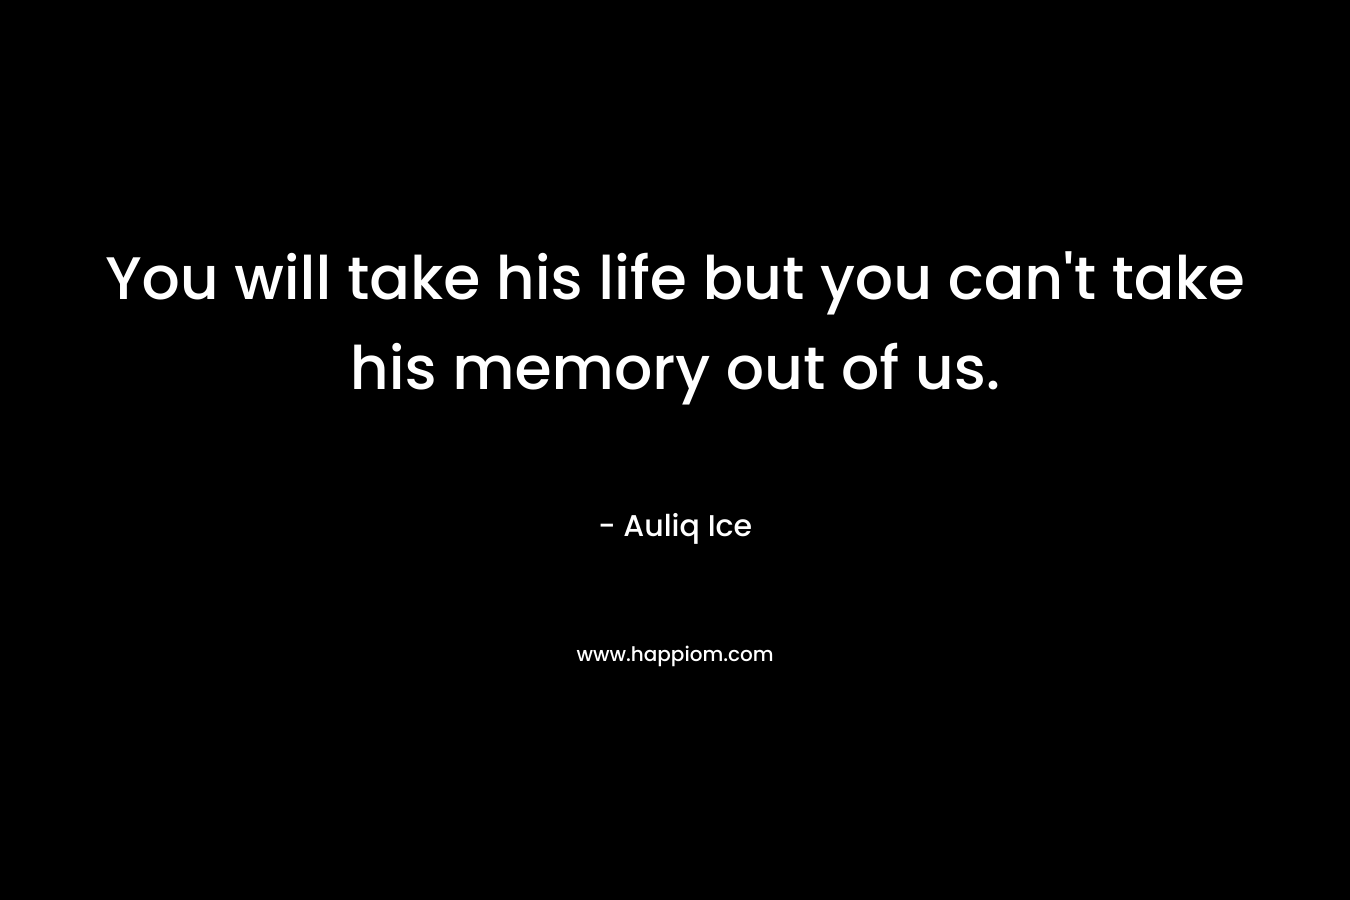 You will take his life but you can’t take his memory out of us. – Auliq Ice